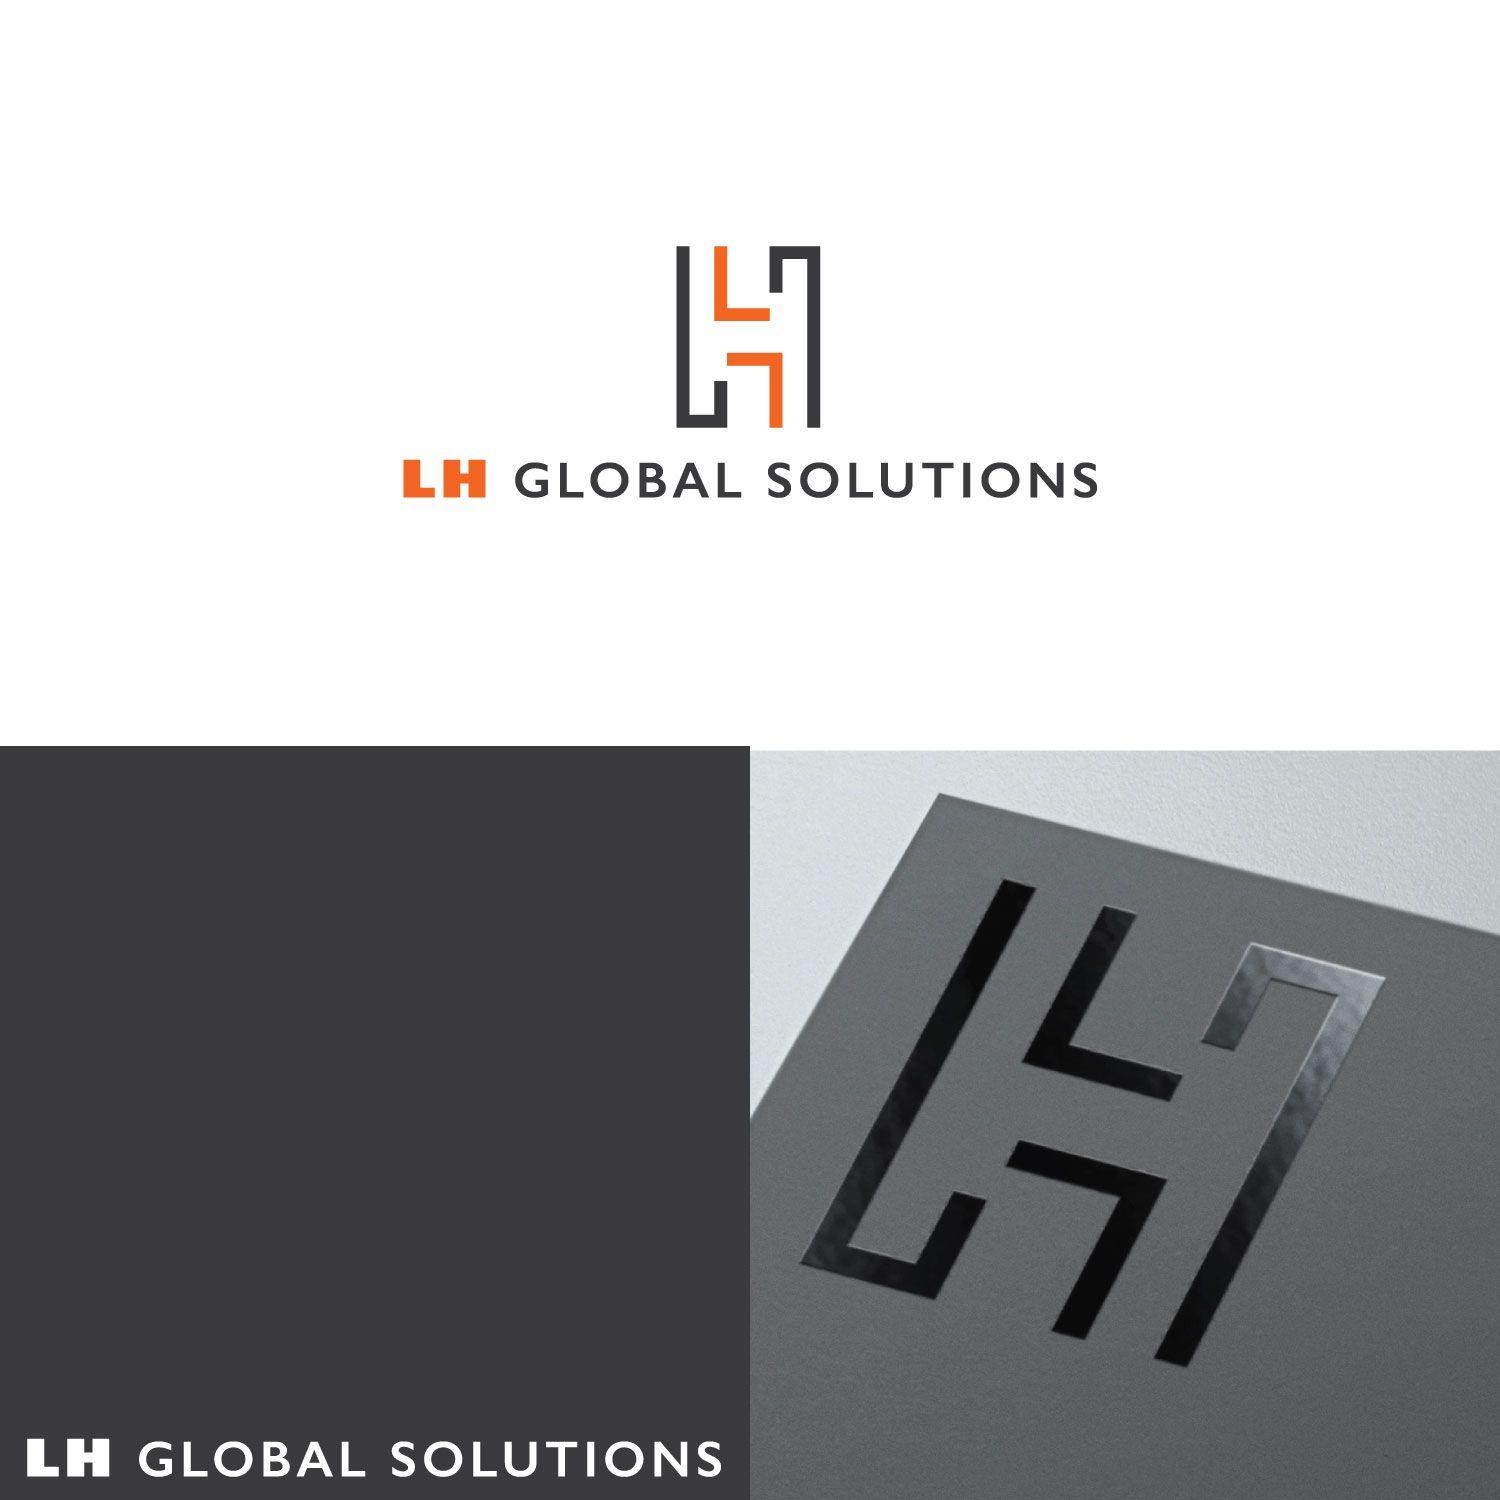 LH Logo - Professional, Serious, Business Consultant Logo Design for LH Global